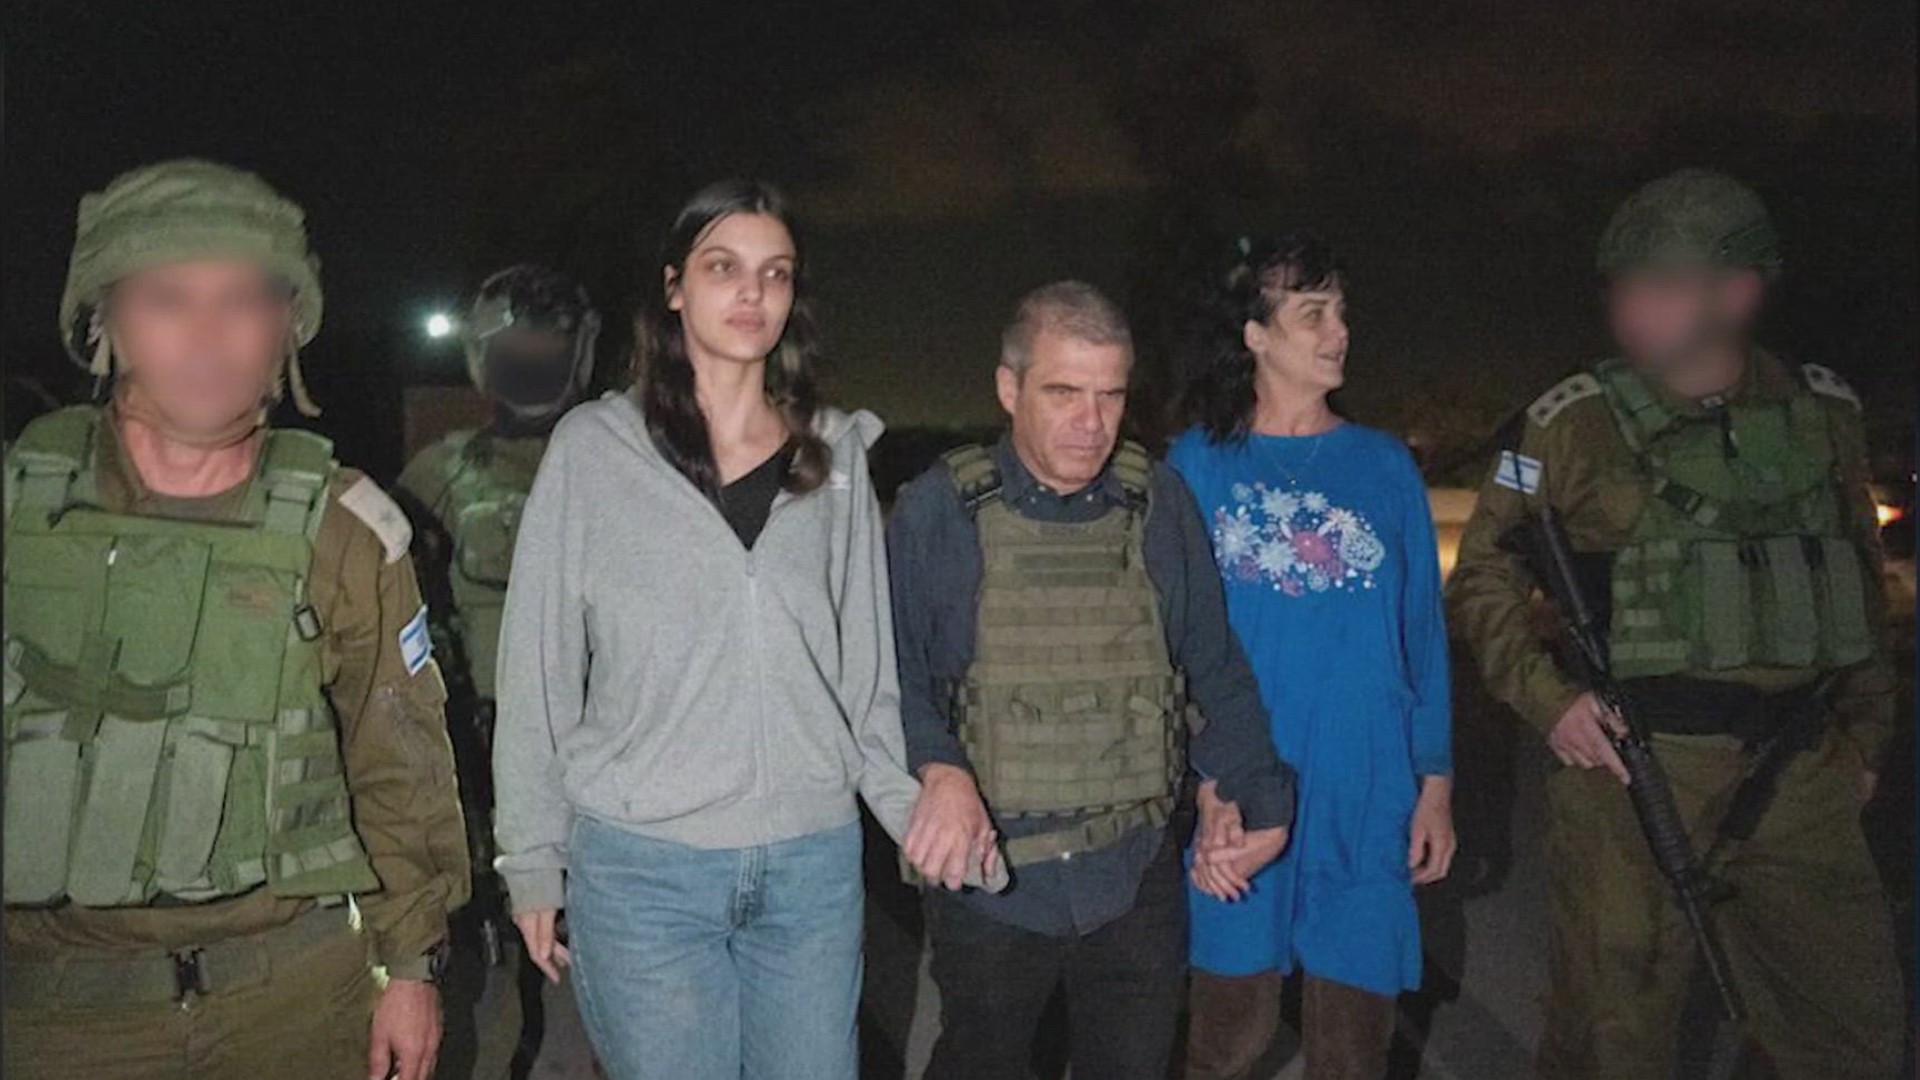 Natalie and Judith Raanan, two Americans who have family in Denver, are finally free after Hamas held them hostage for nearly two weeks.